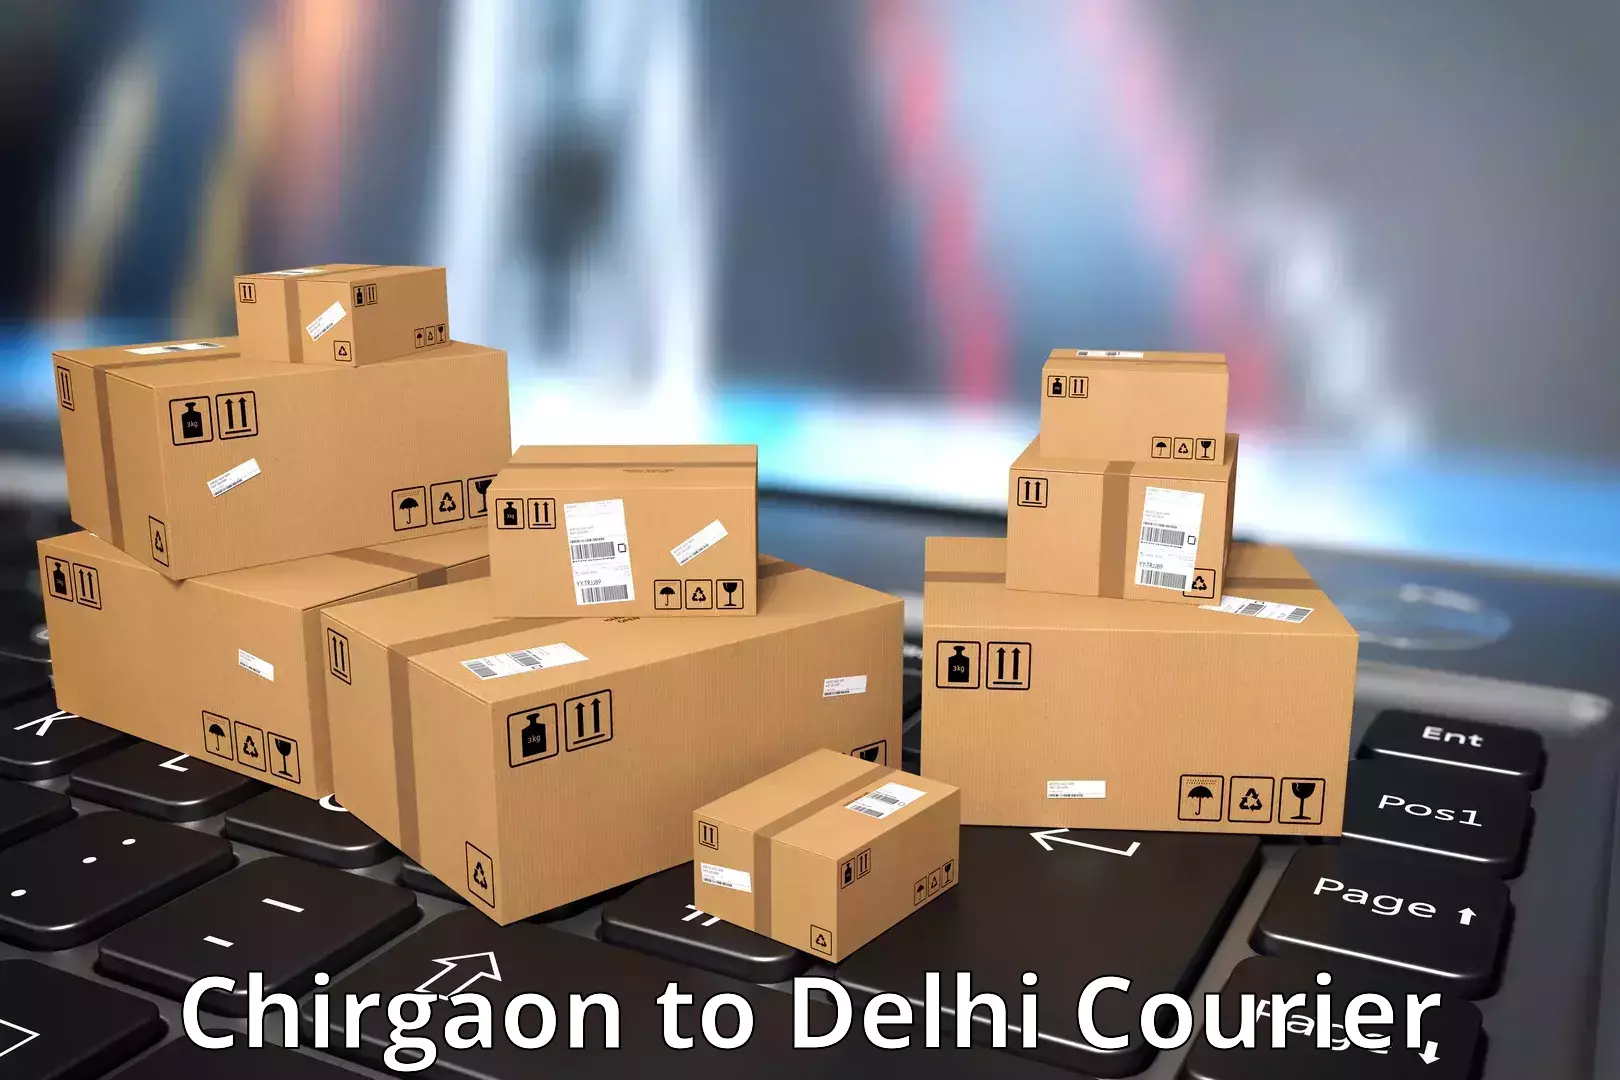 Subscription-based courier Chirgaon to University of Delhi